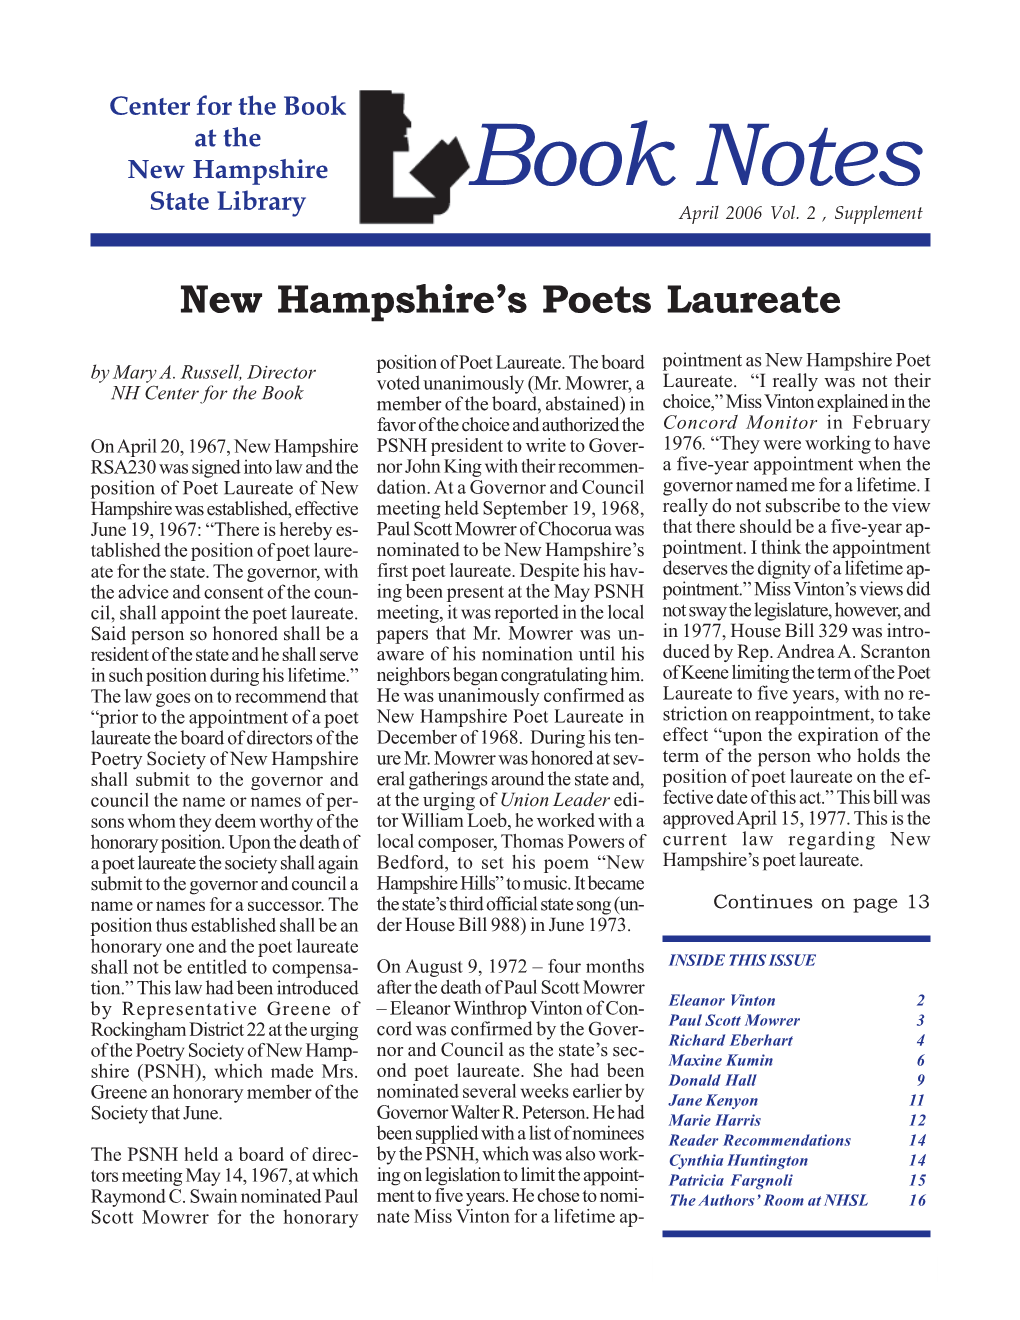 New Hampshire Poet Laureate in Striction on Reappointment, to Take Laureate the Board of Directors of the December of 1968